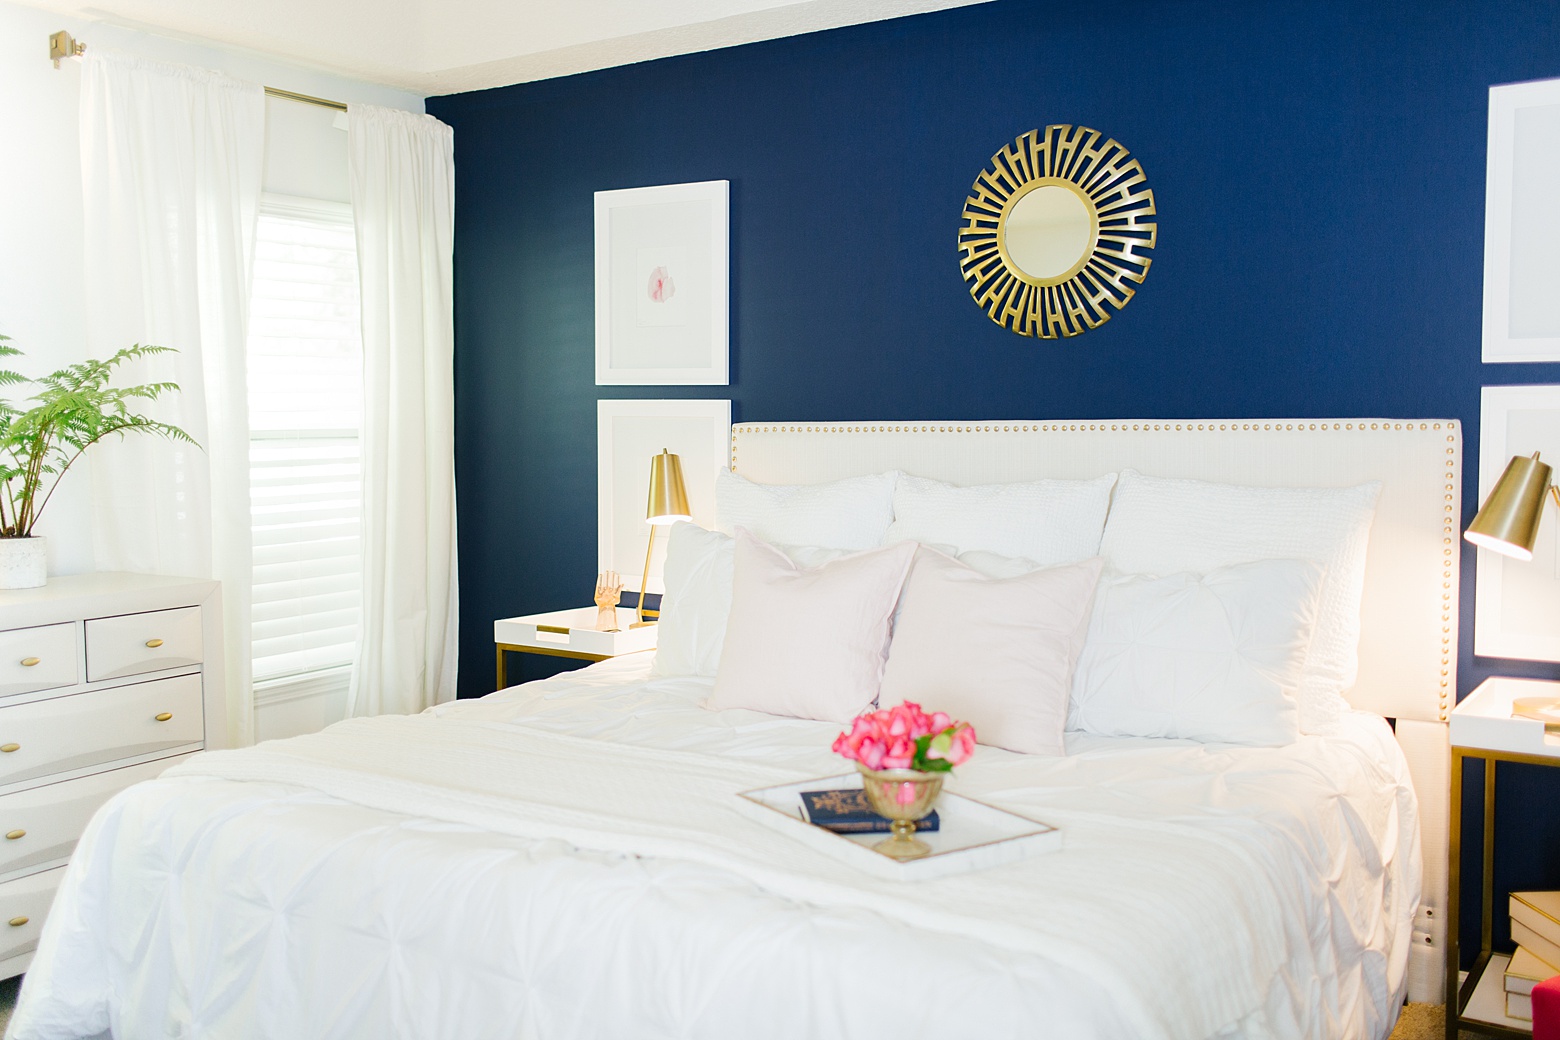 Modern Navy and Pink Master Bedroom on Megan Martin Creative, White comforter, upholstered headboard, gold task lamp, navy accent wall, white walls